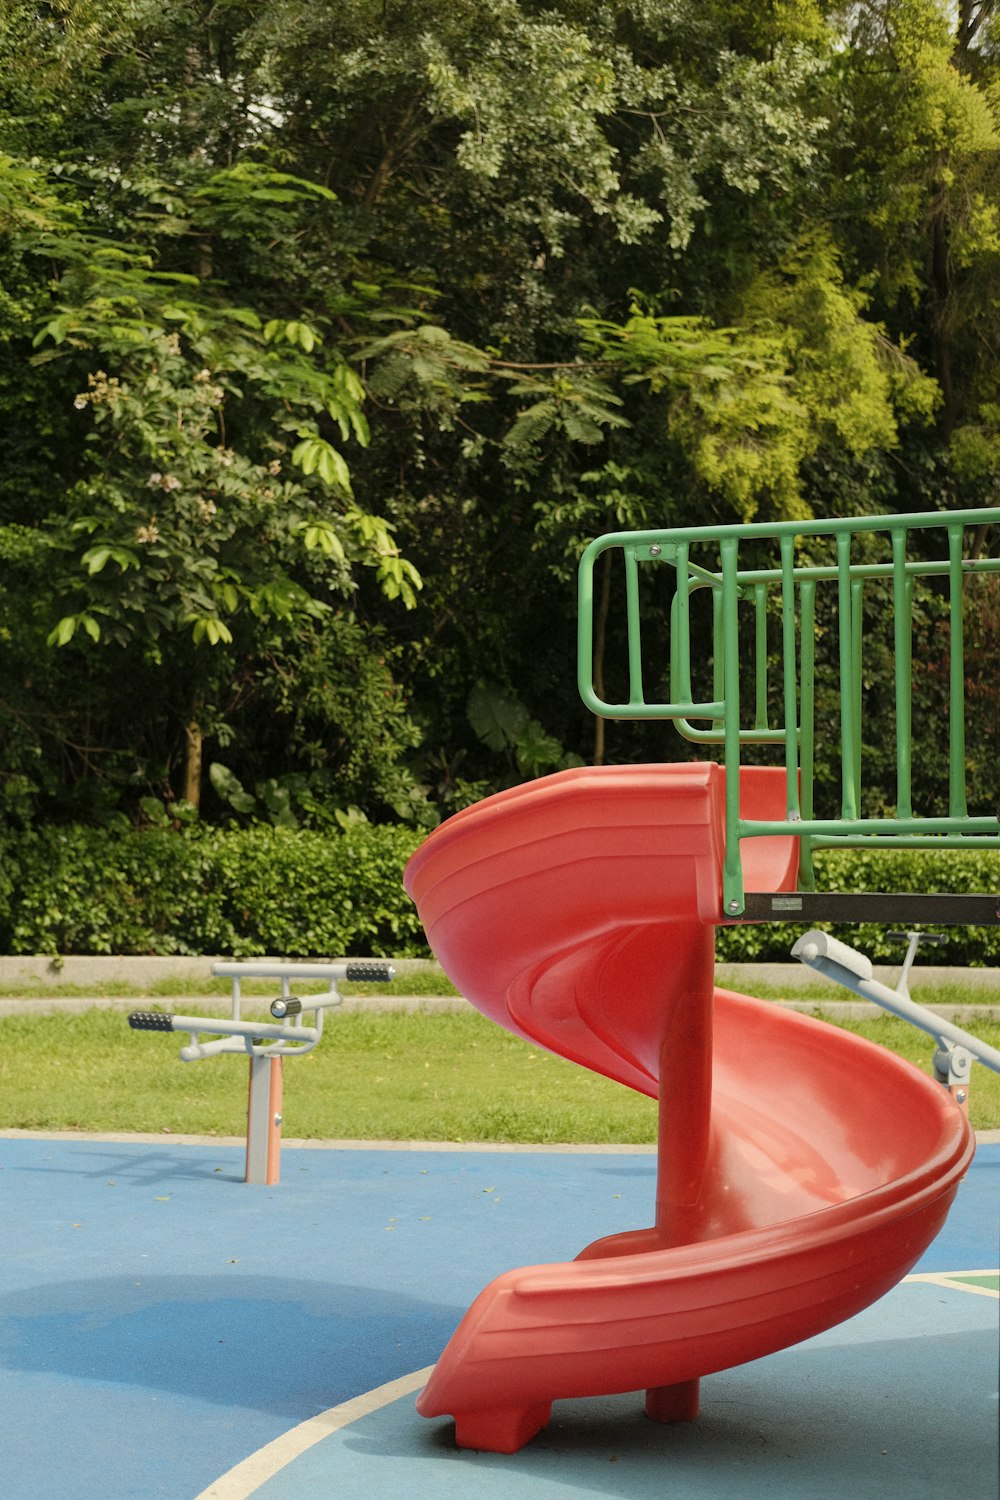 a playground with a red slide and green trees in the background